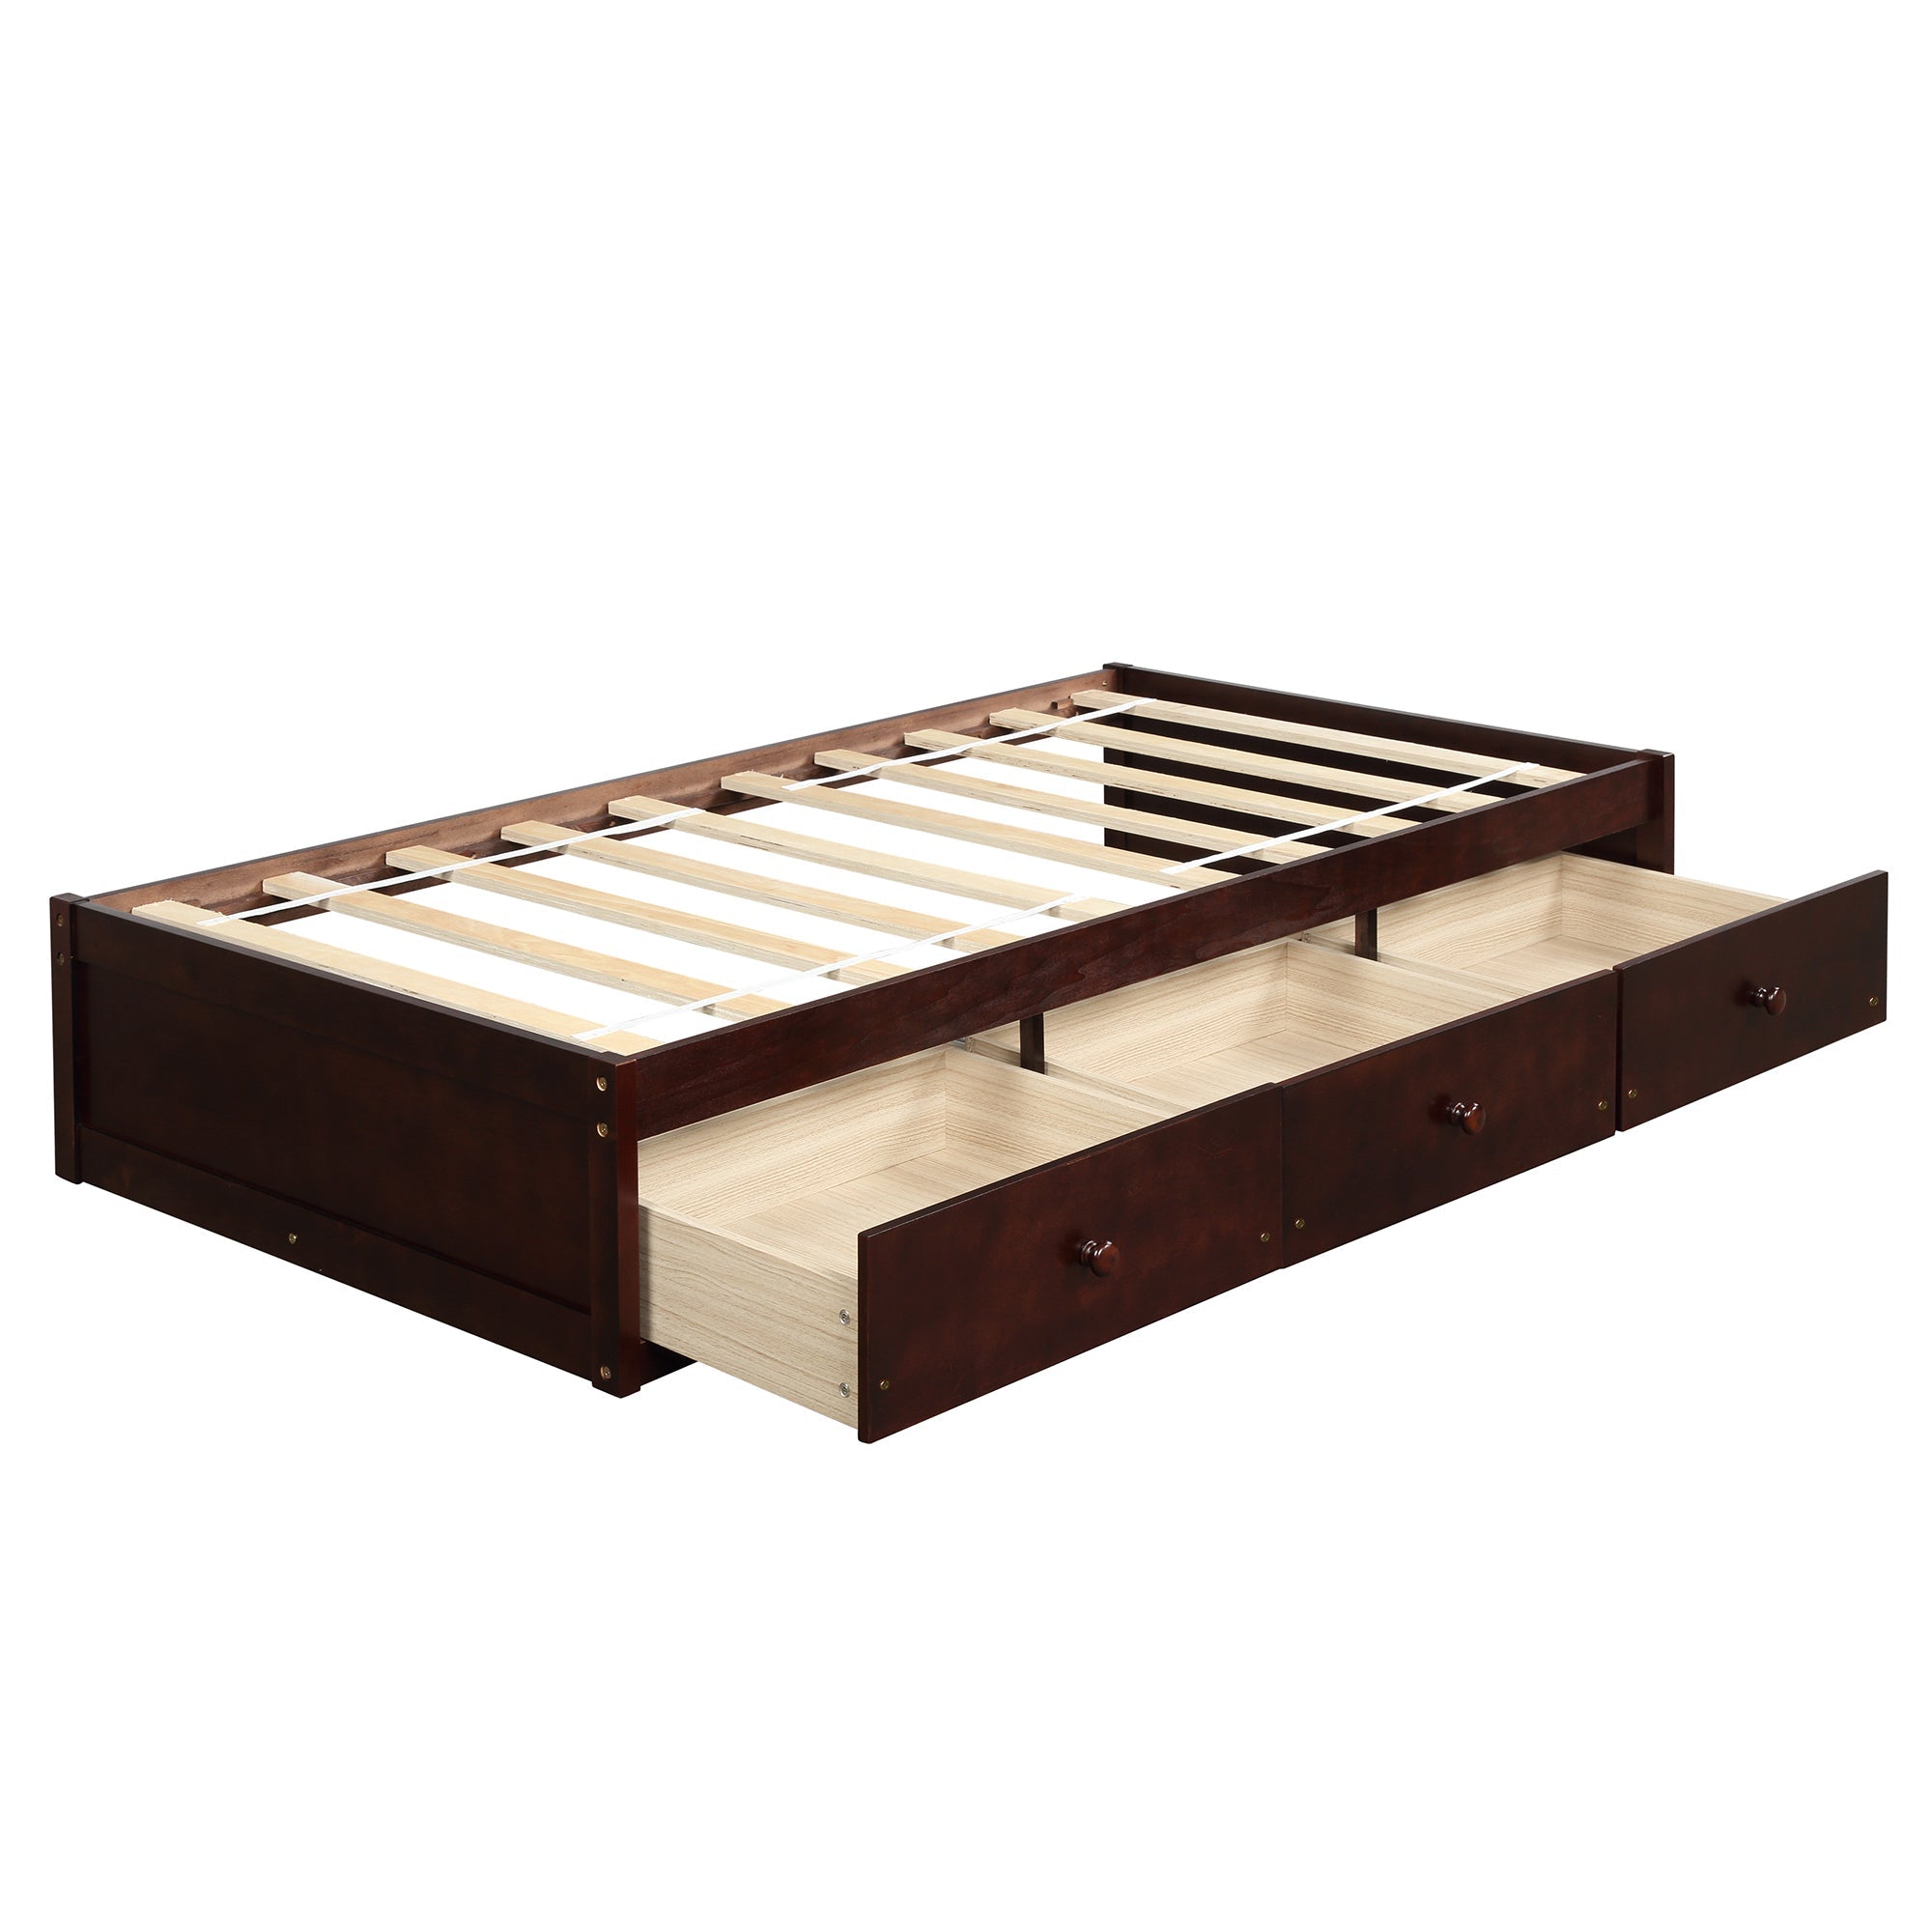 Twin Size Platform Storage Bed with 3 Drawers by Orisfur - Space-Saving Organization Solution